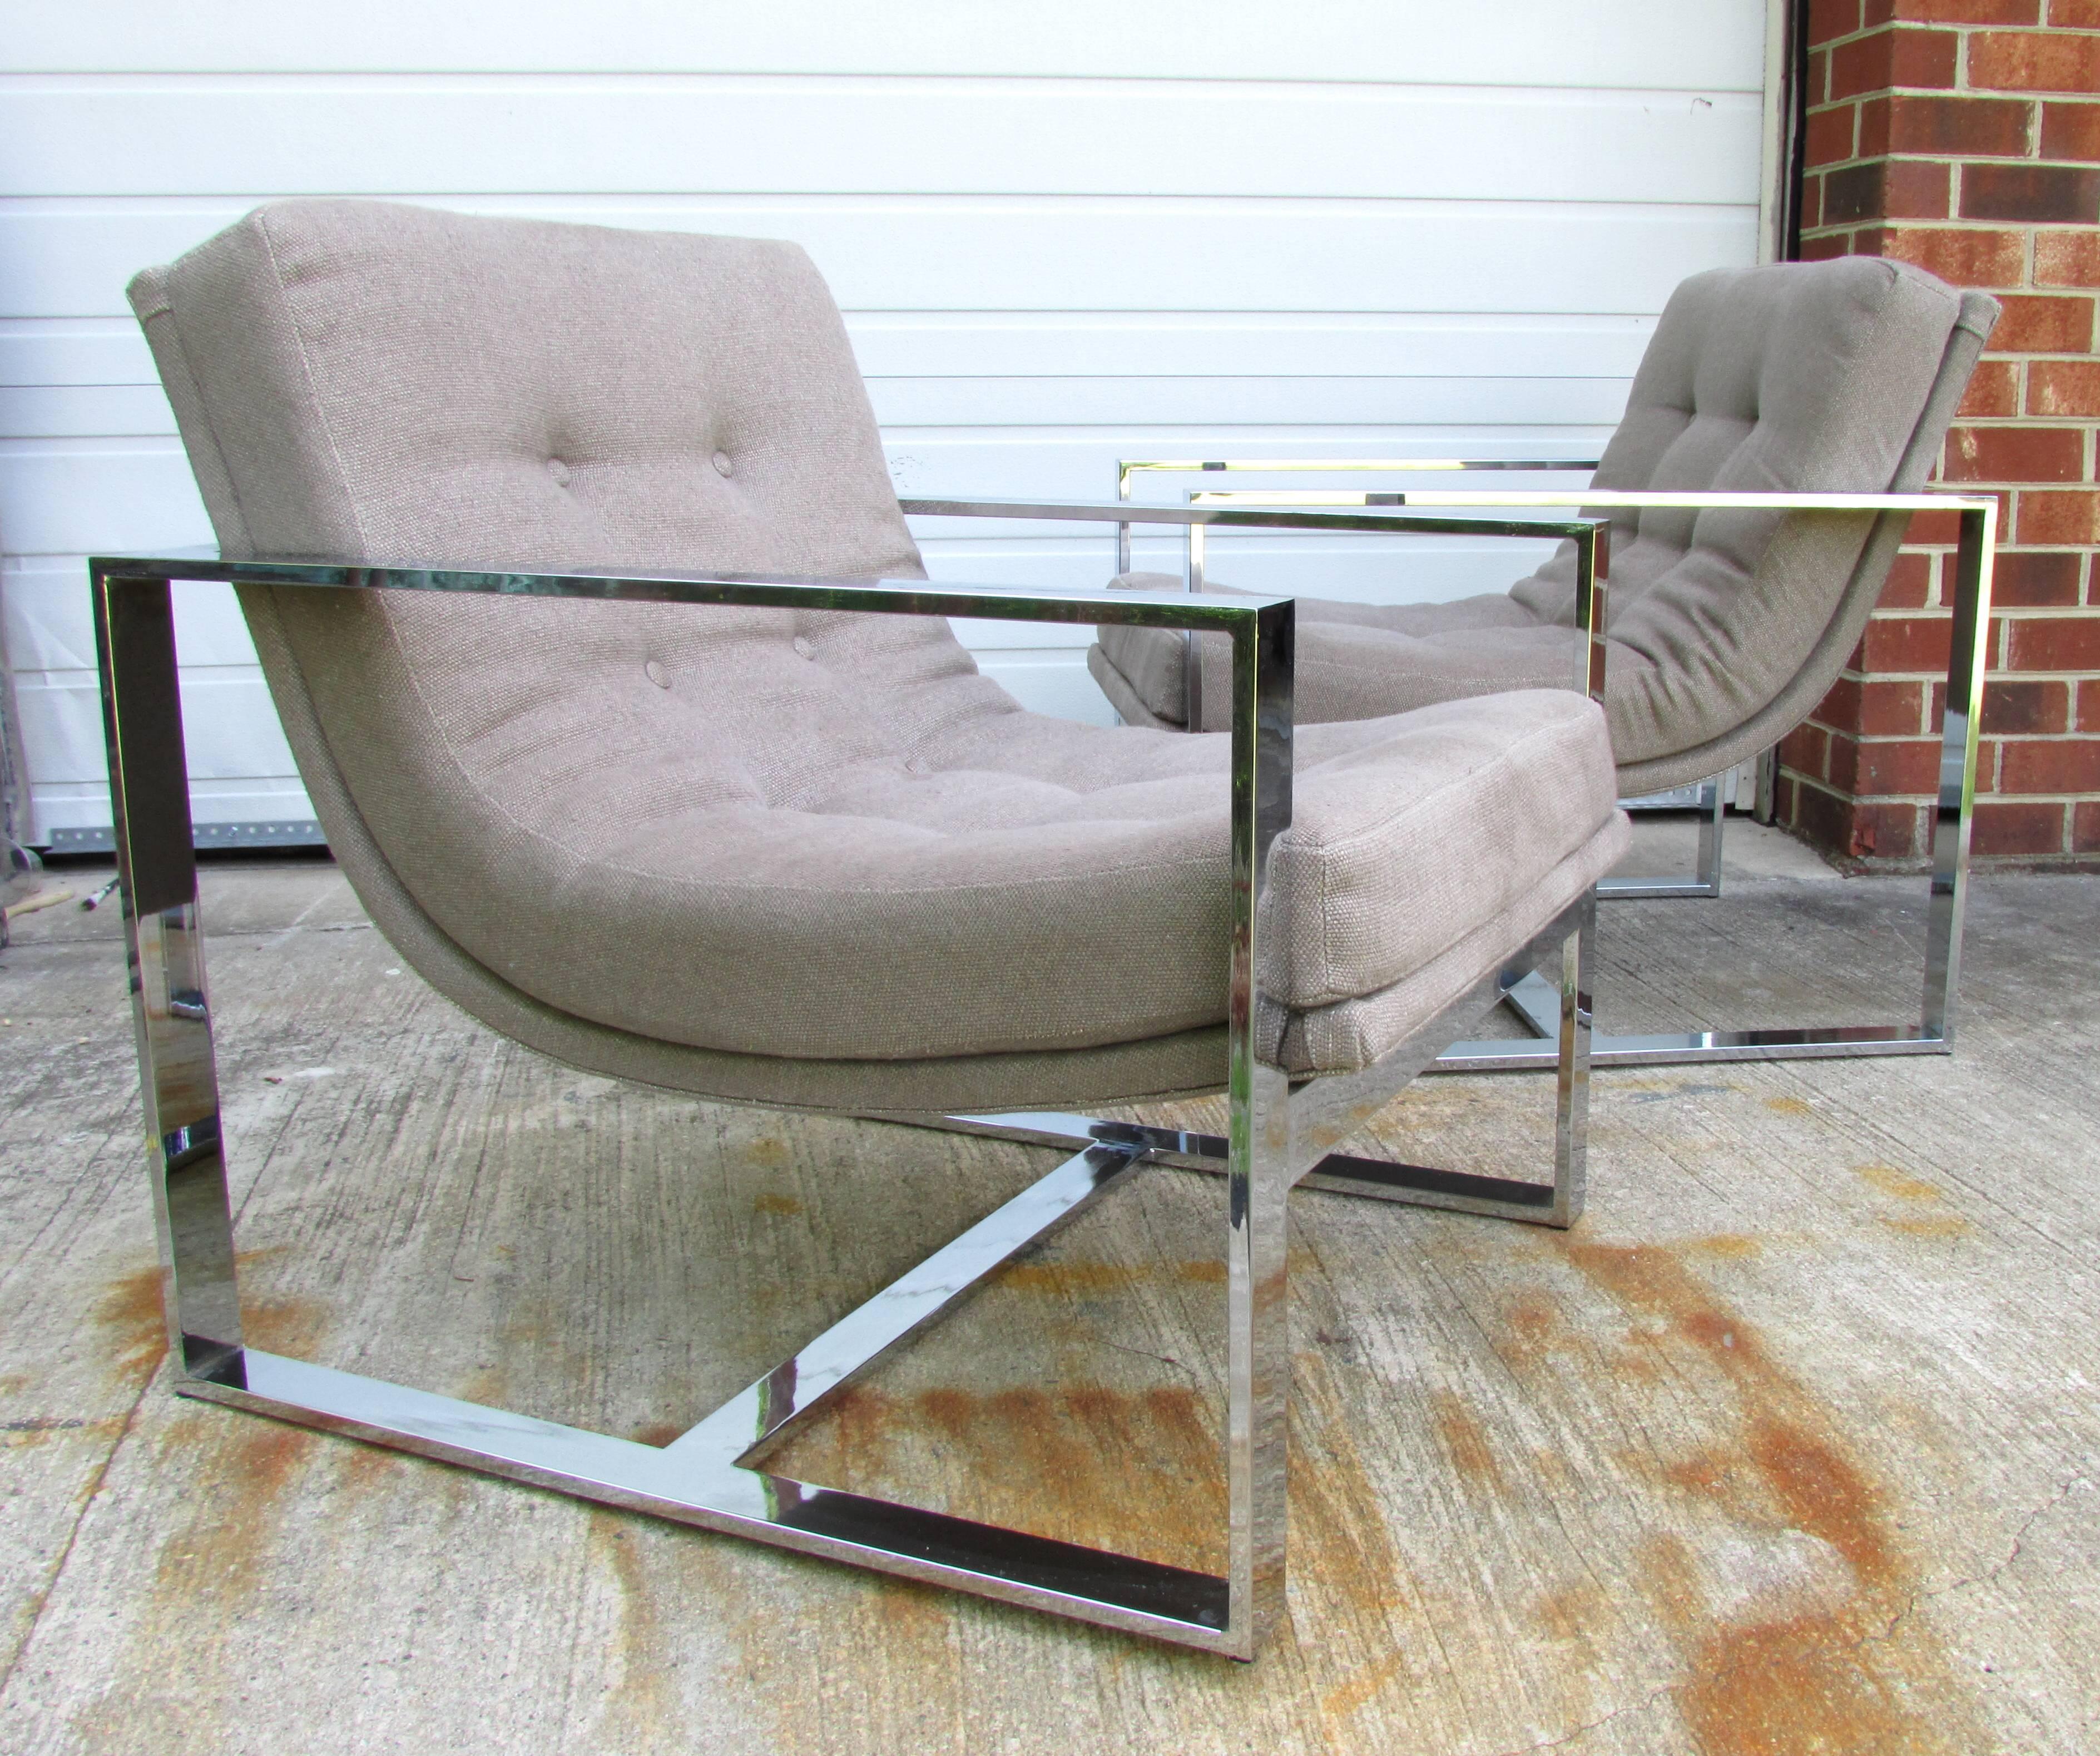 Pair of Milo Baughman Cube Chairs In Good Condition For Sale In High Point, NC